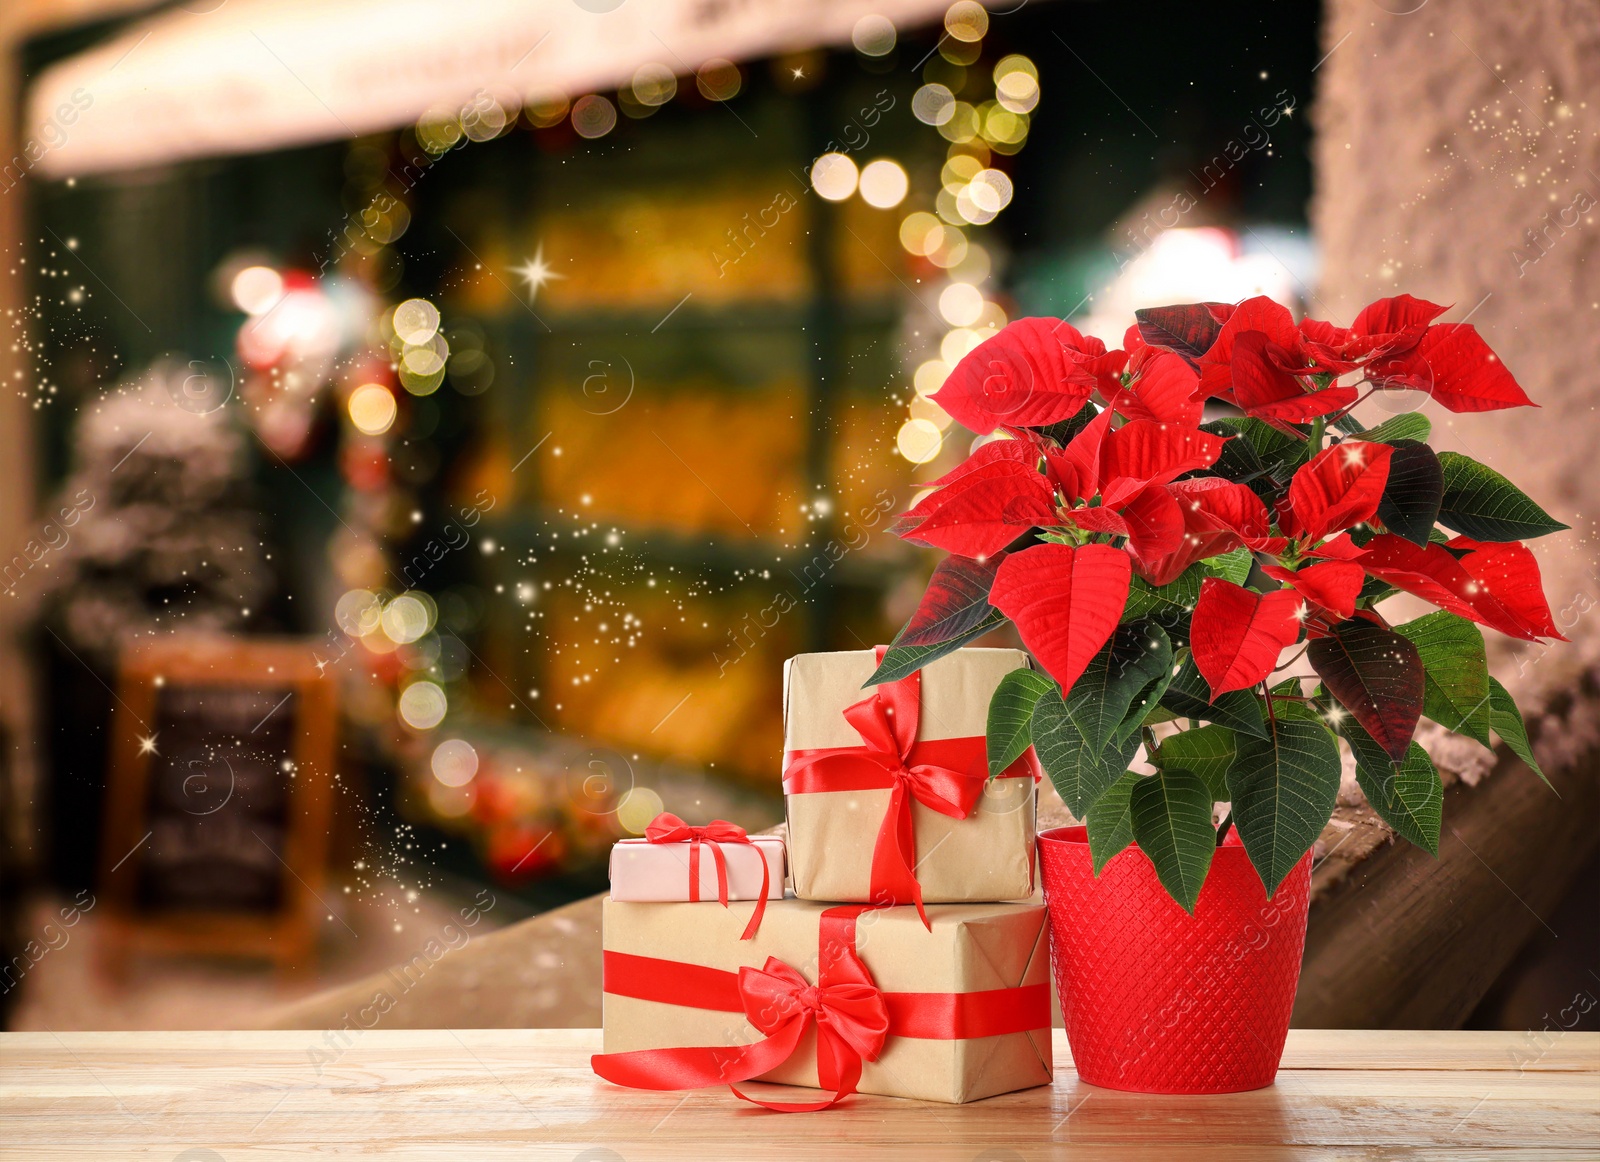 Image of Christmas traditional poinsettia flower and gift boxes on wooden table on blurred background, space for text